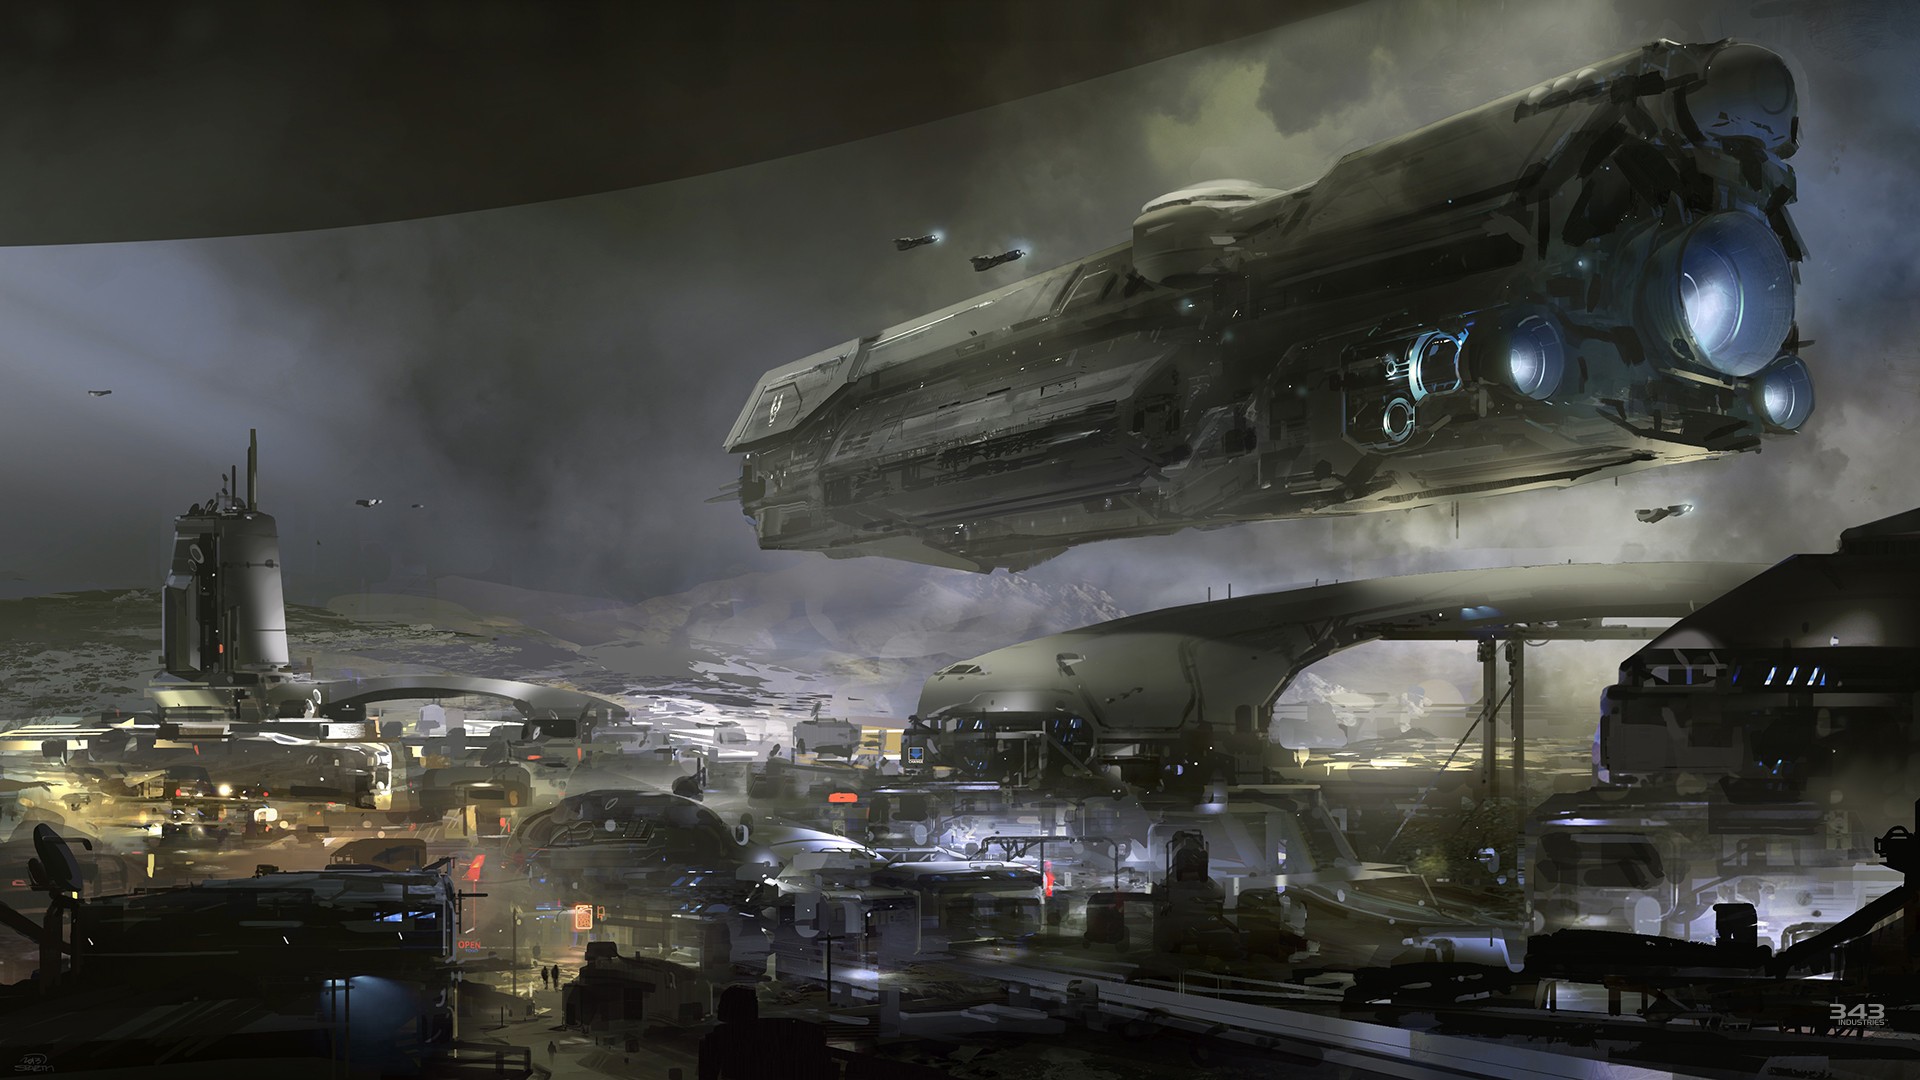 General 1920x1080 Halo 5 science fiction video games video game art vehicle Halo 5: Guardians